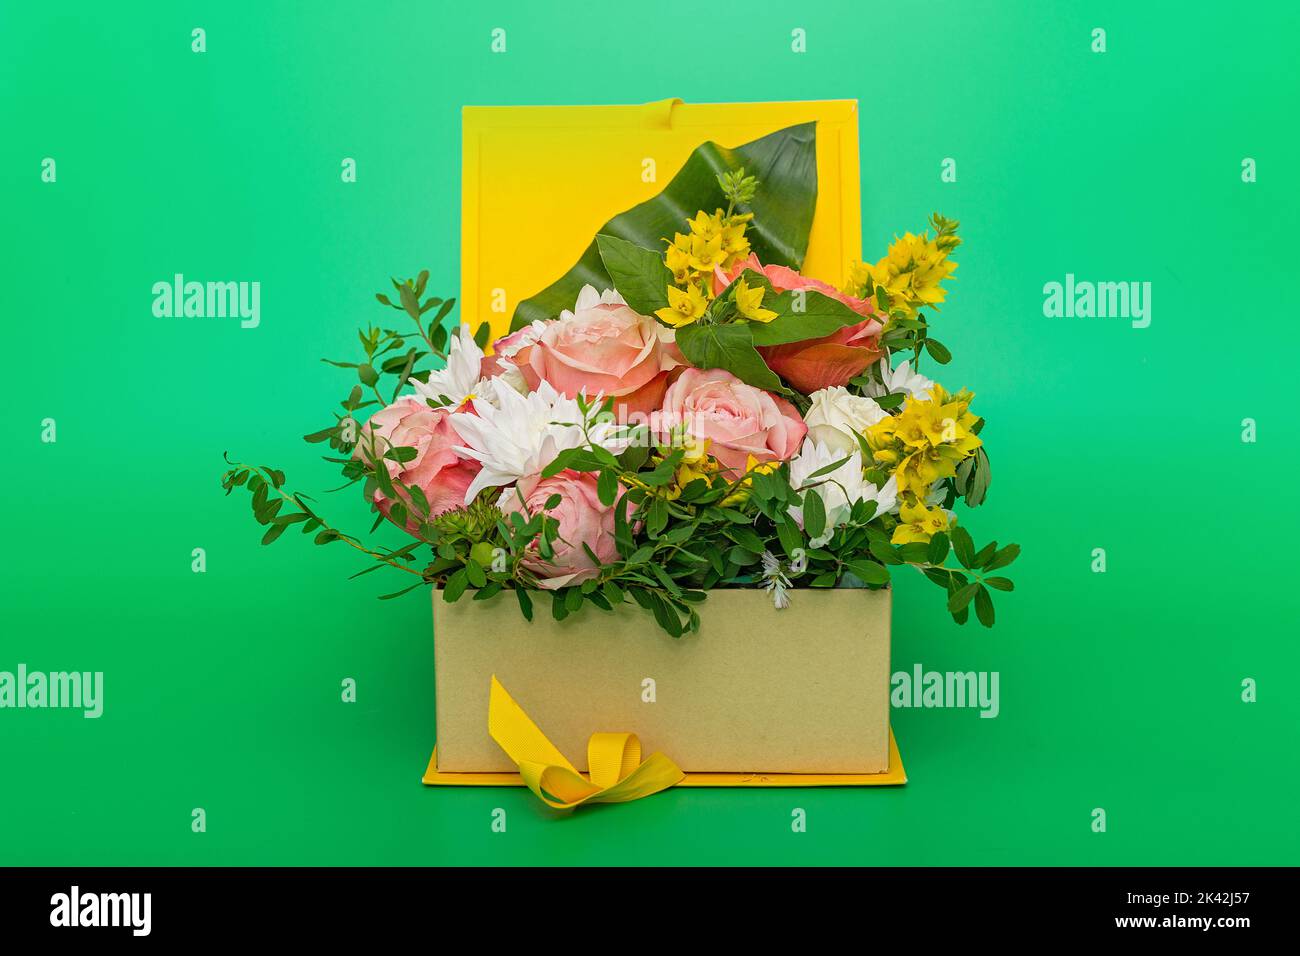 Original flower arrangement in a yellow gift box, on a green background Stock Photo